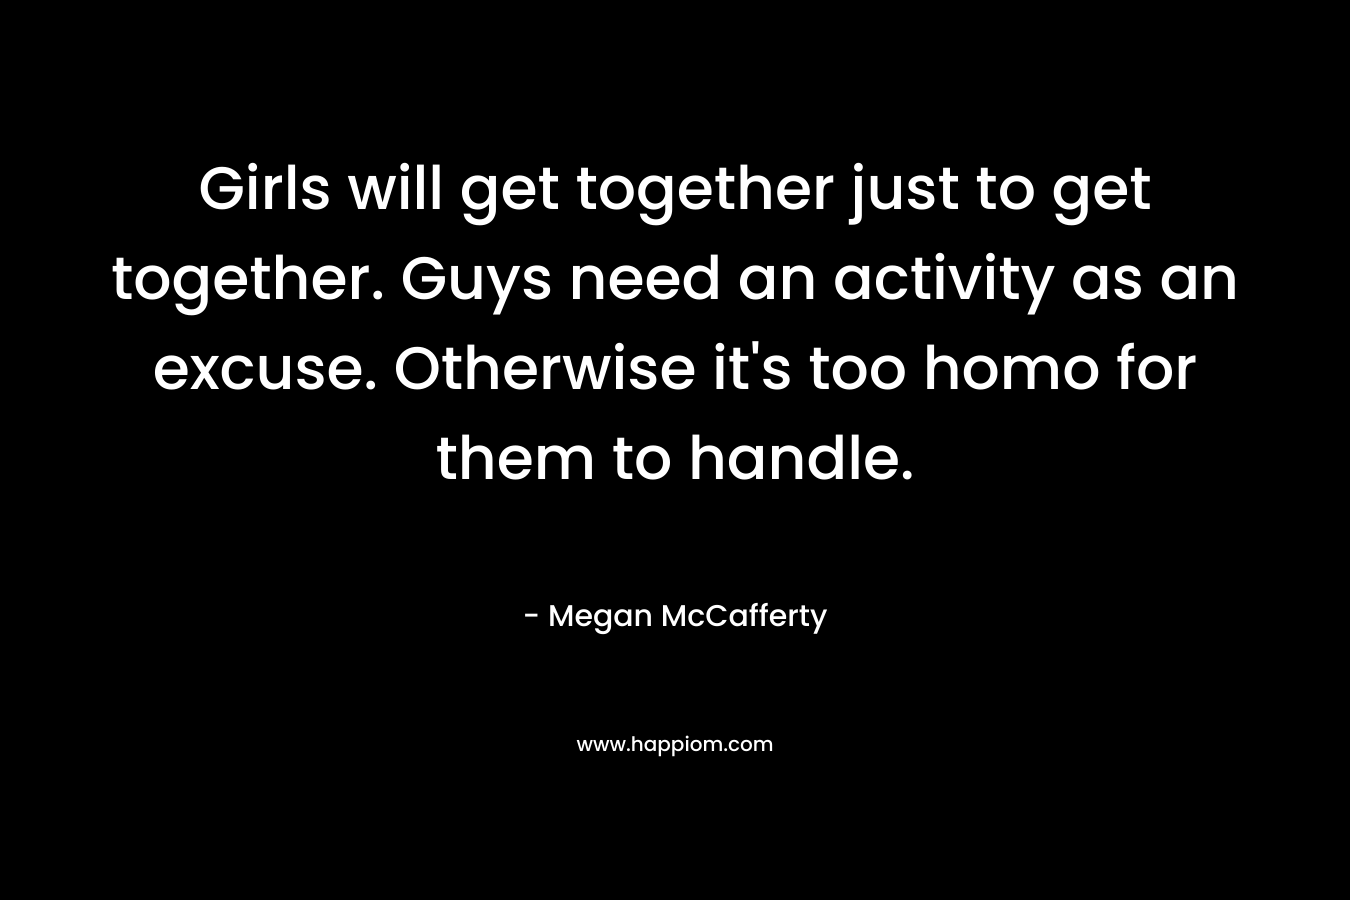 Girls will get together just to get together. Guys need an activity as an excuse. Otherwise it’s too homo for them to handle. – Megan McCafferty